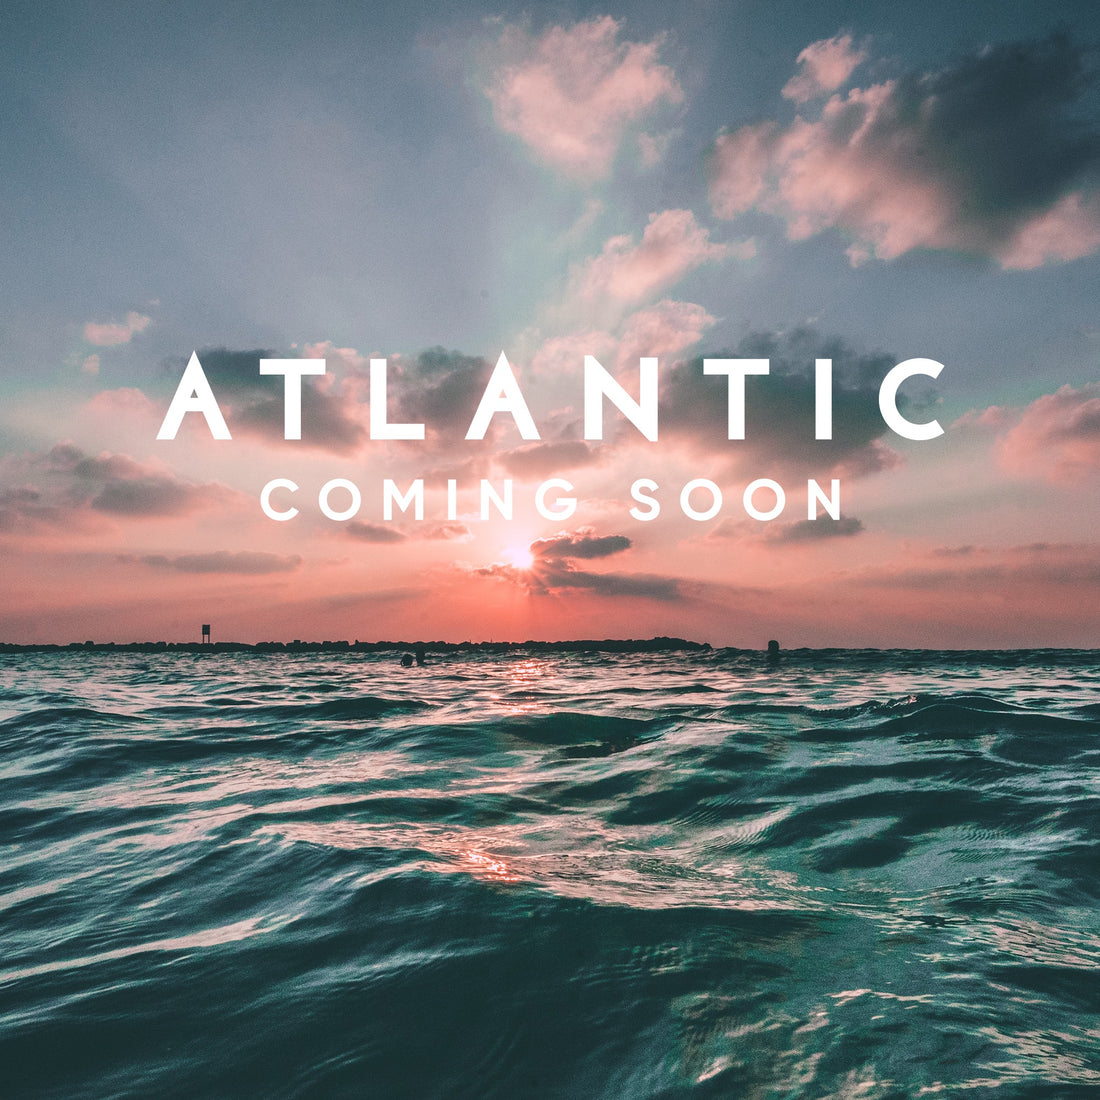 What does Atlantic sound like?